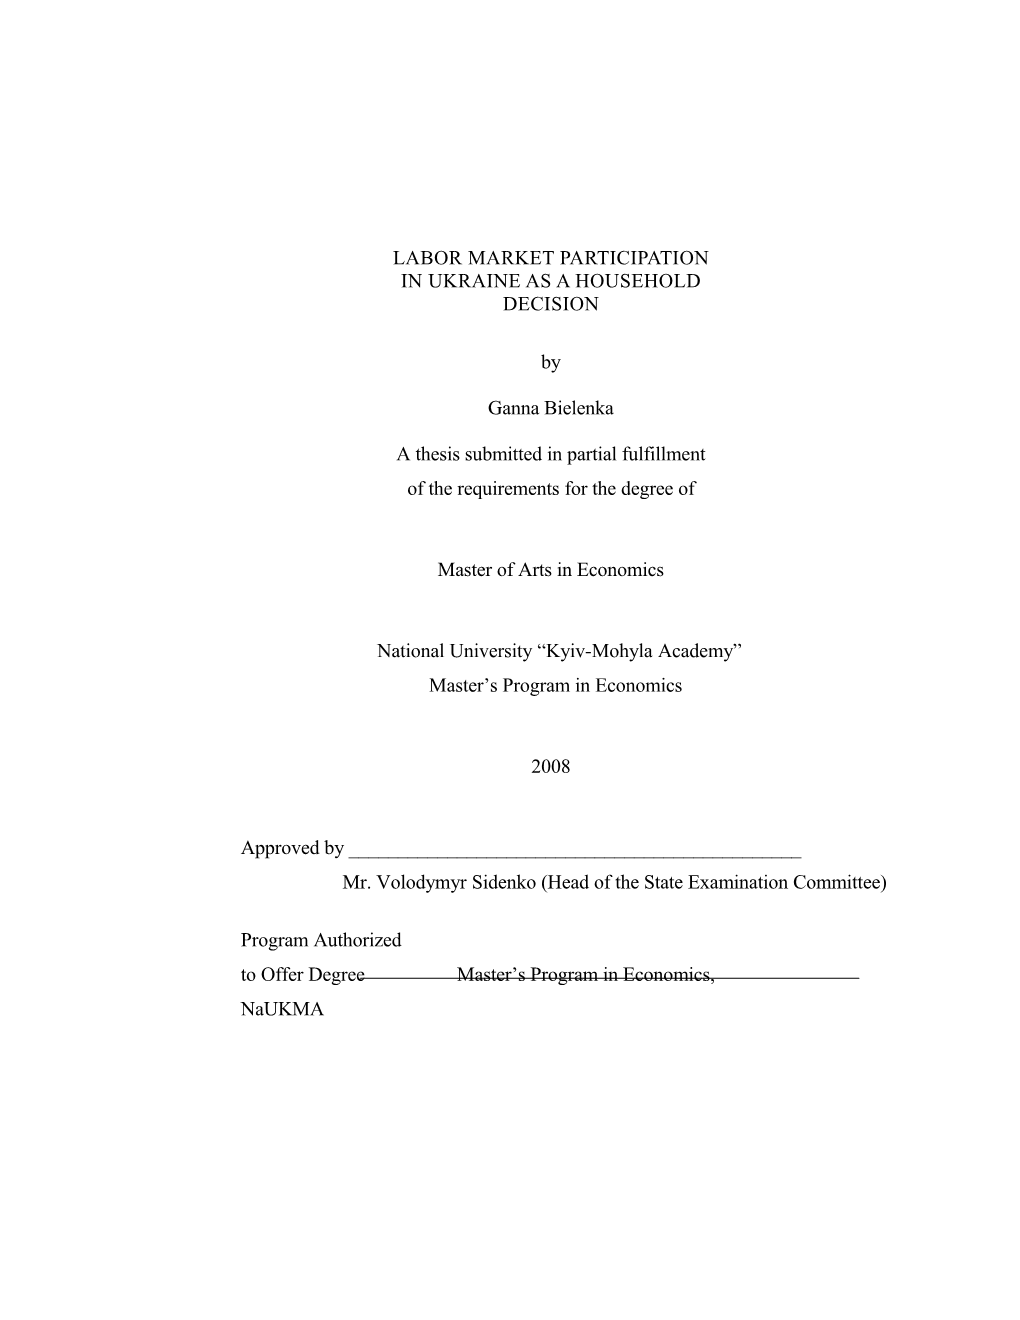 A Thesis Submitted in Partial Fulfillment of the Requirements for the Degree Of